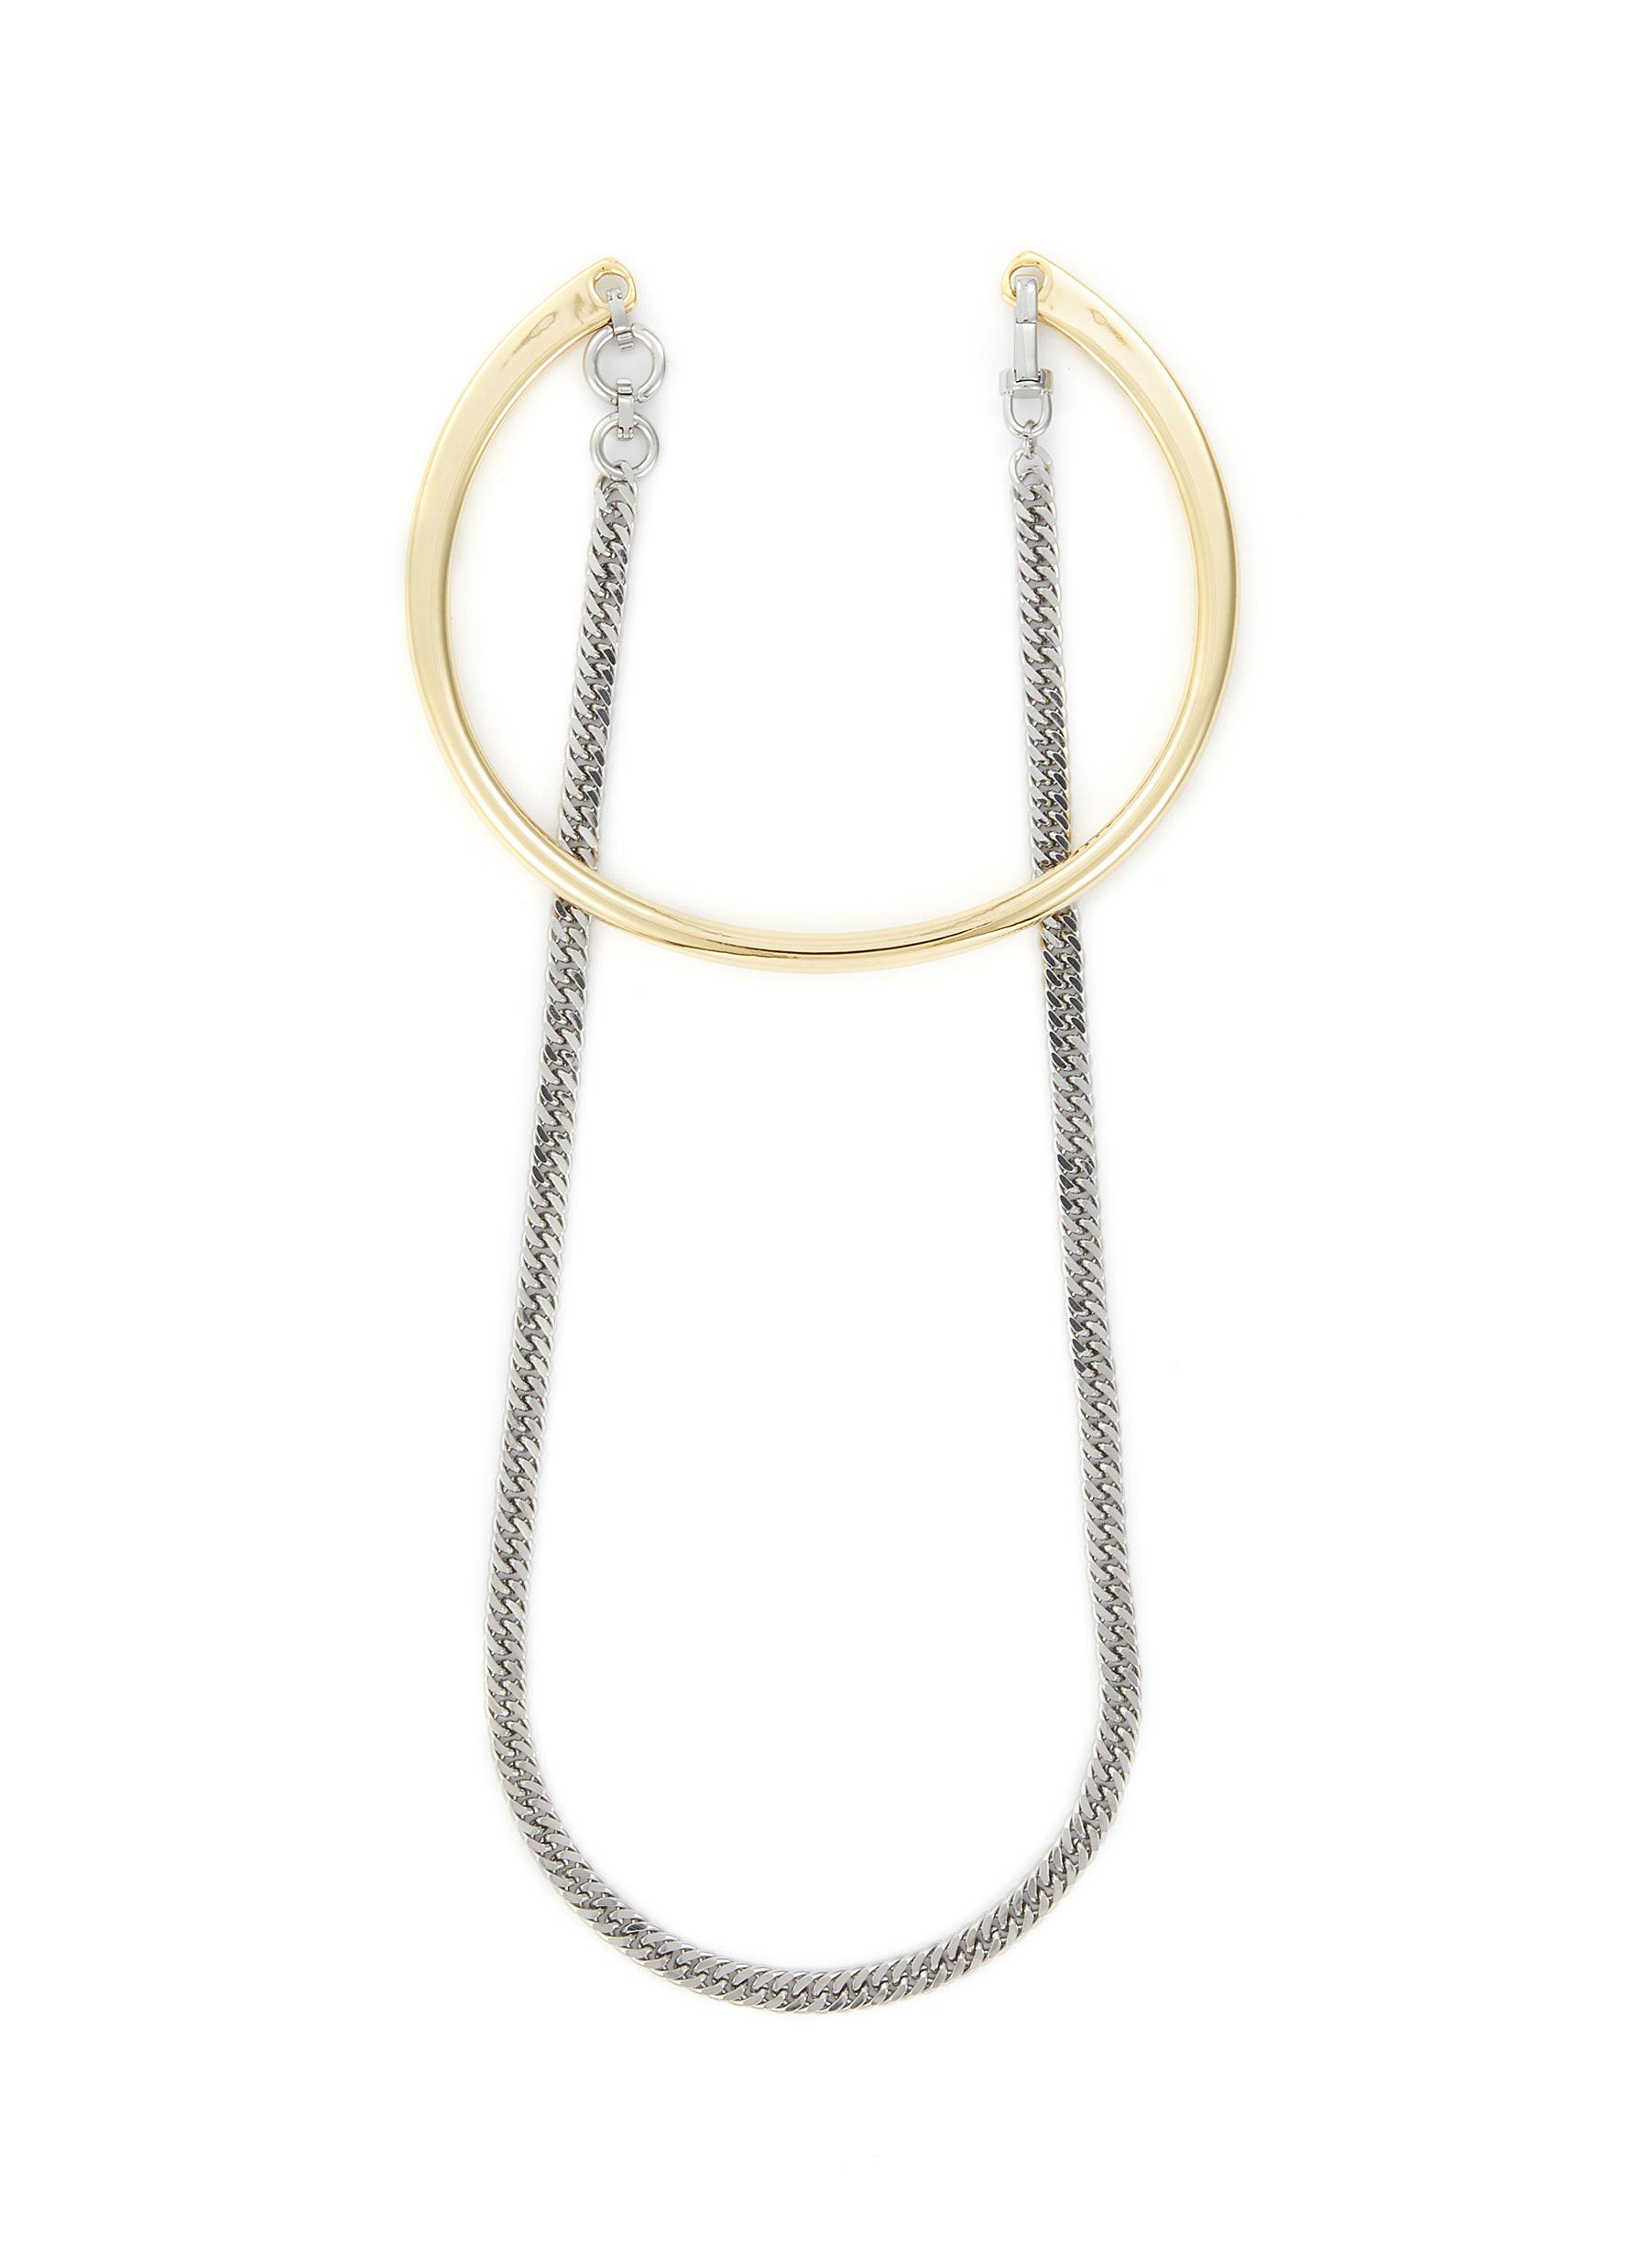 Suzanne 12K Gold Metal Wrap Necklace